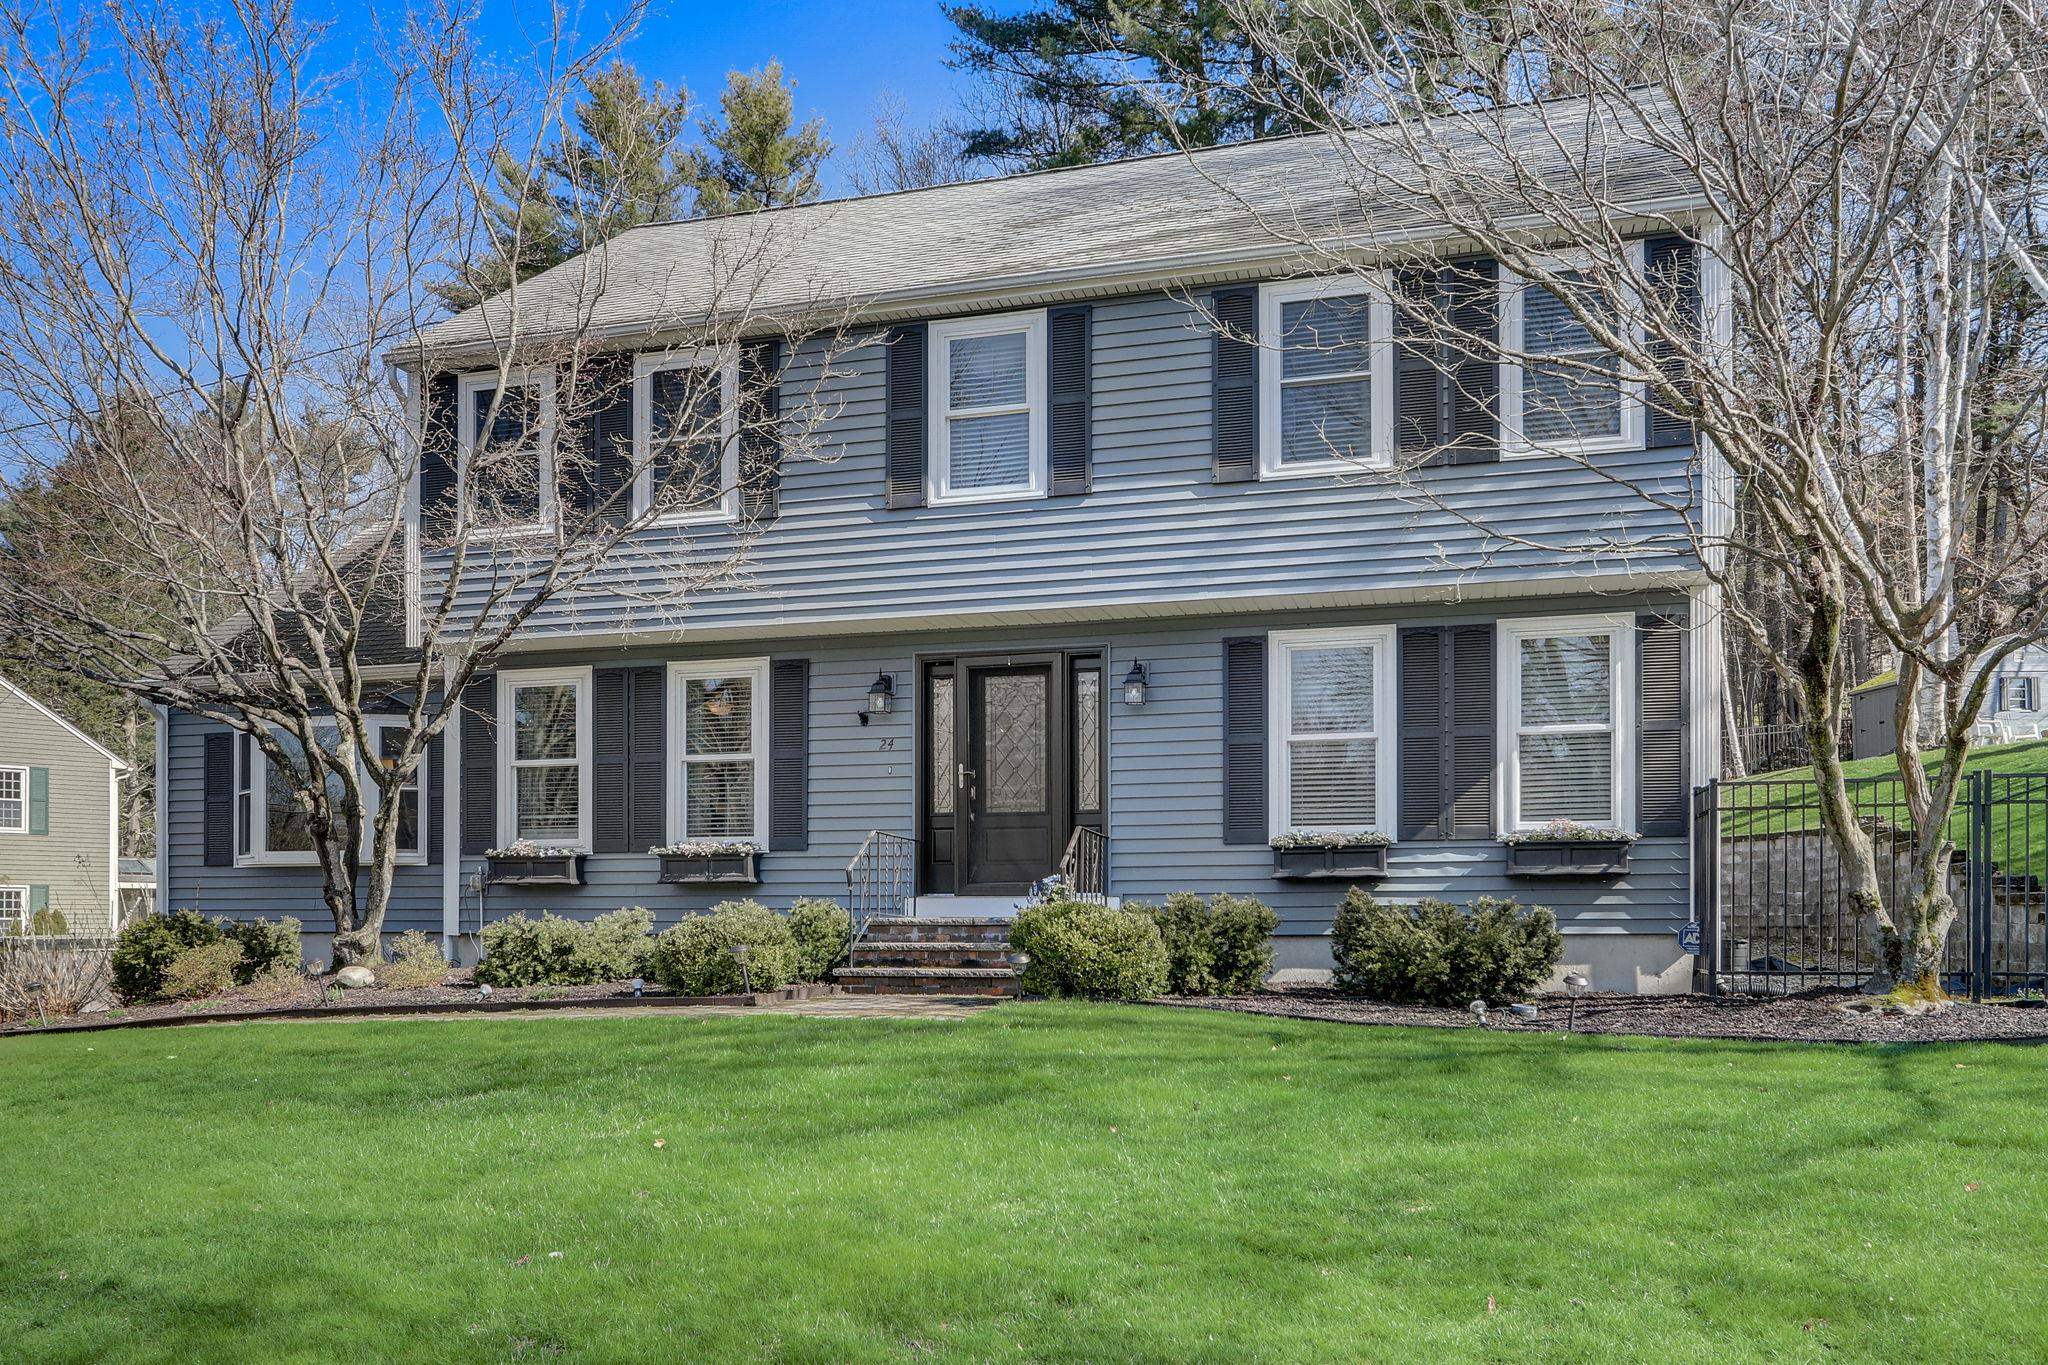 Welcome to 24 Bicentennial Dr., a handsome Colonial home in South Nashua, boasting 3300+ SF, 5 bedrms, 3 baths, a finished LL & 3rd floor, with enclosed screen porch and an in ground heated pool! This home offers all the updates & upgrades you are looking for (Kitchen, Appliances, Bathrooms, Custom Built Ins, Flooring, Paint, Windows & Shades, Slider & Garage Doors, Exterior Siding, Elec Service, EV Charging Station, etc.), in addition to its outstanding location in the desirable Bicentennial School District, within just a few minutes to Rte 3, Exits 1 & 4!  The upgraded, gourmet eat in kitchen offers ample cabinetry and pantry storage along with an oversized island, great lighting and access to the spacious screened porch & pool.  Additionally, off the kitchen is an upgraded ½ bath with private laundry room, front 2 back family room with gas fireplace and an elegant formal dining room! All the flooring throughout the home is hardwood except the 3rd floor and Primary bedroom, which has newly installed neutral carpeting. Both of the bedrooms on the 3rd floor have bright sunny skylights! The property is professionally landscaped with 3 sets of granite steps, retaining walls w/gardens, irrigation and includes a lovely fence surrounding the entire rear yard and pool area with a wooded area behind, providing summer privacy! Come visit our open houses on 4/20 1-4pm and 4/21, 11am-2pm, when showings begin.